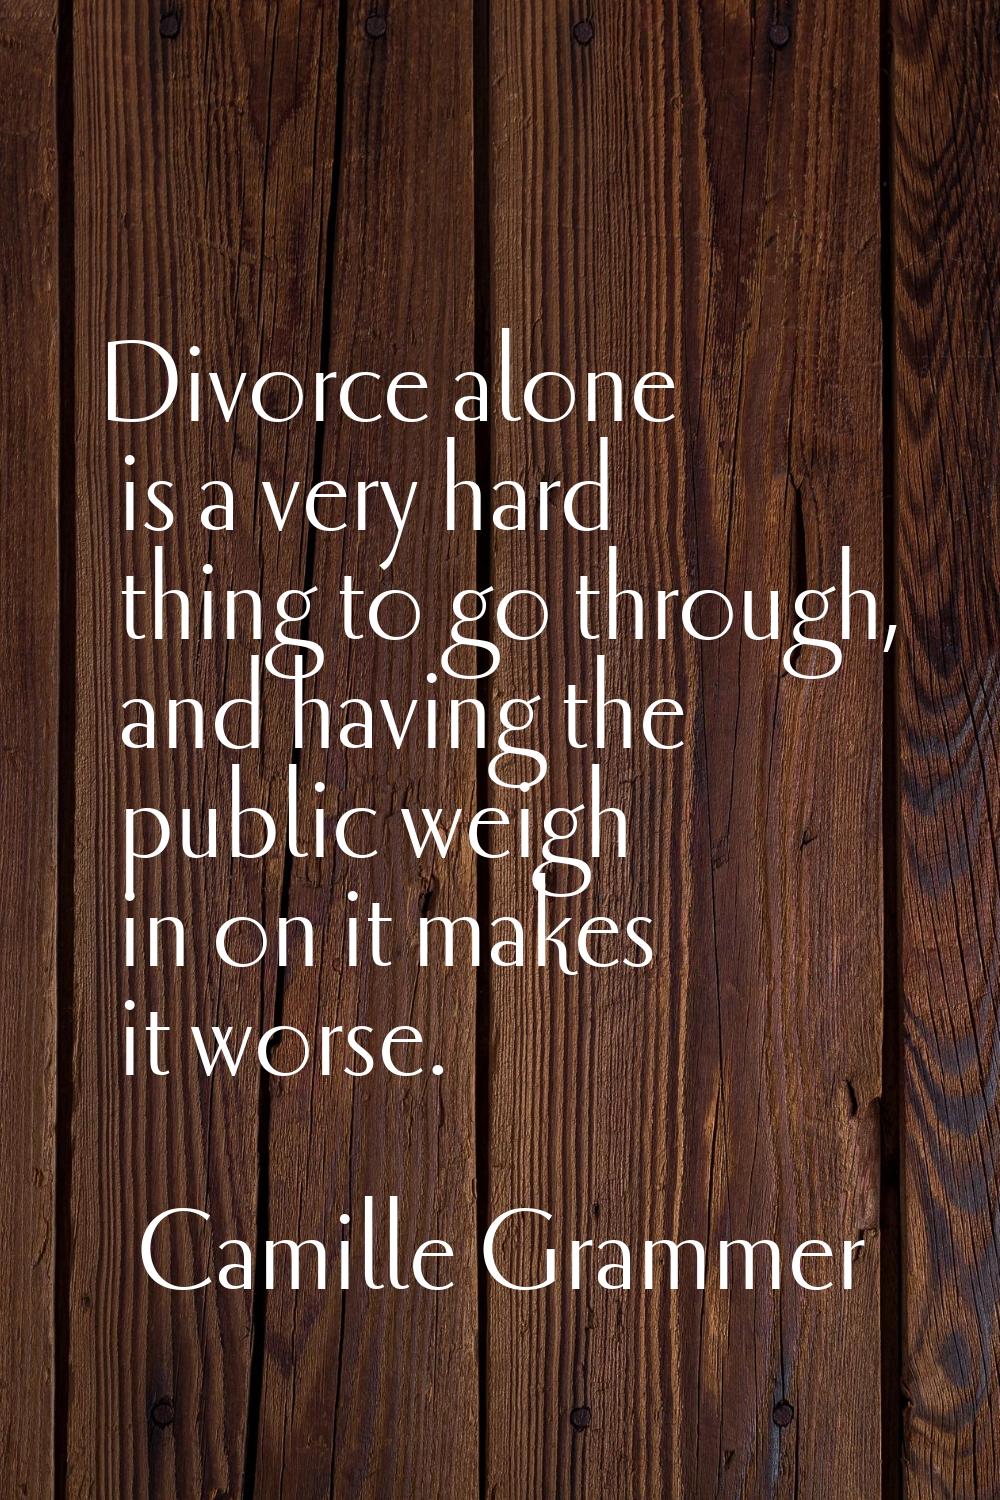 Divorce alone is a very hard thing to go through, and having the public weigh in on it makes it wor